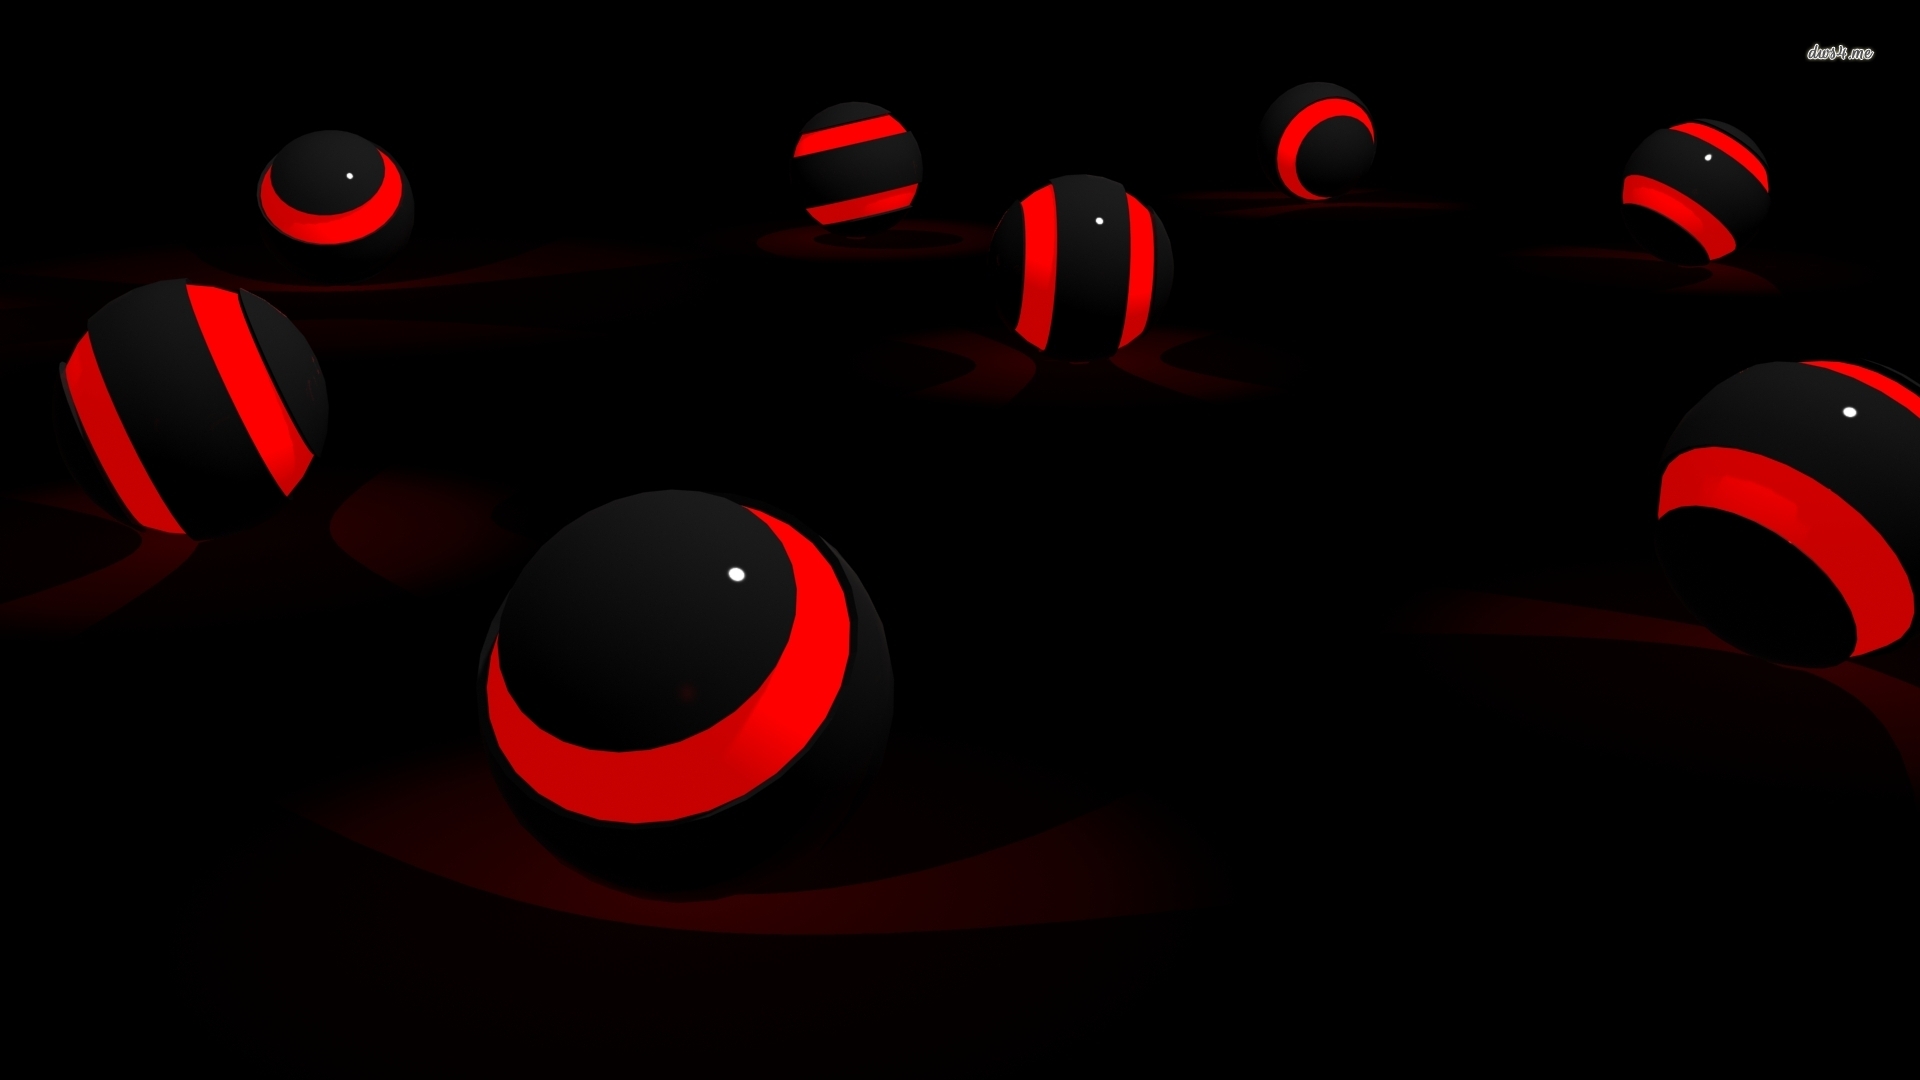 Black Red striped Spheres wallpaper 3D wallpapers